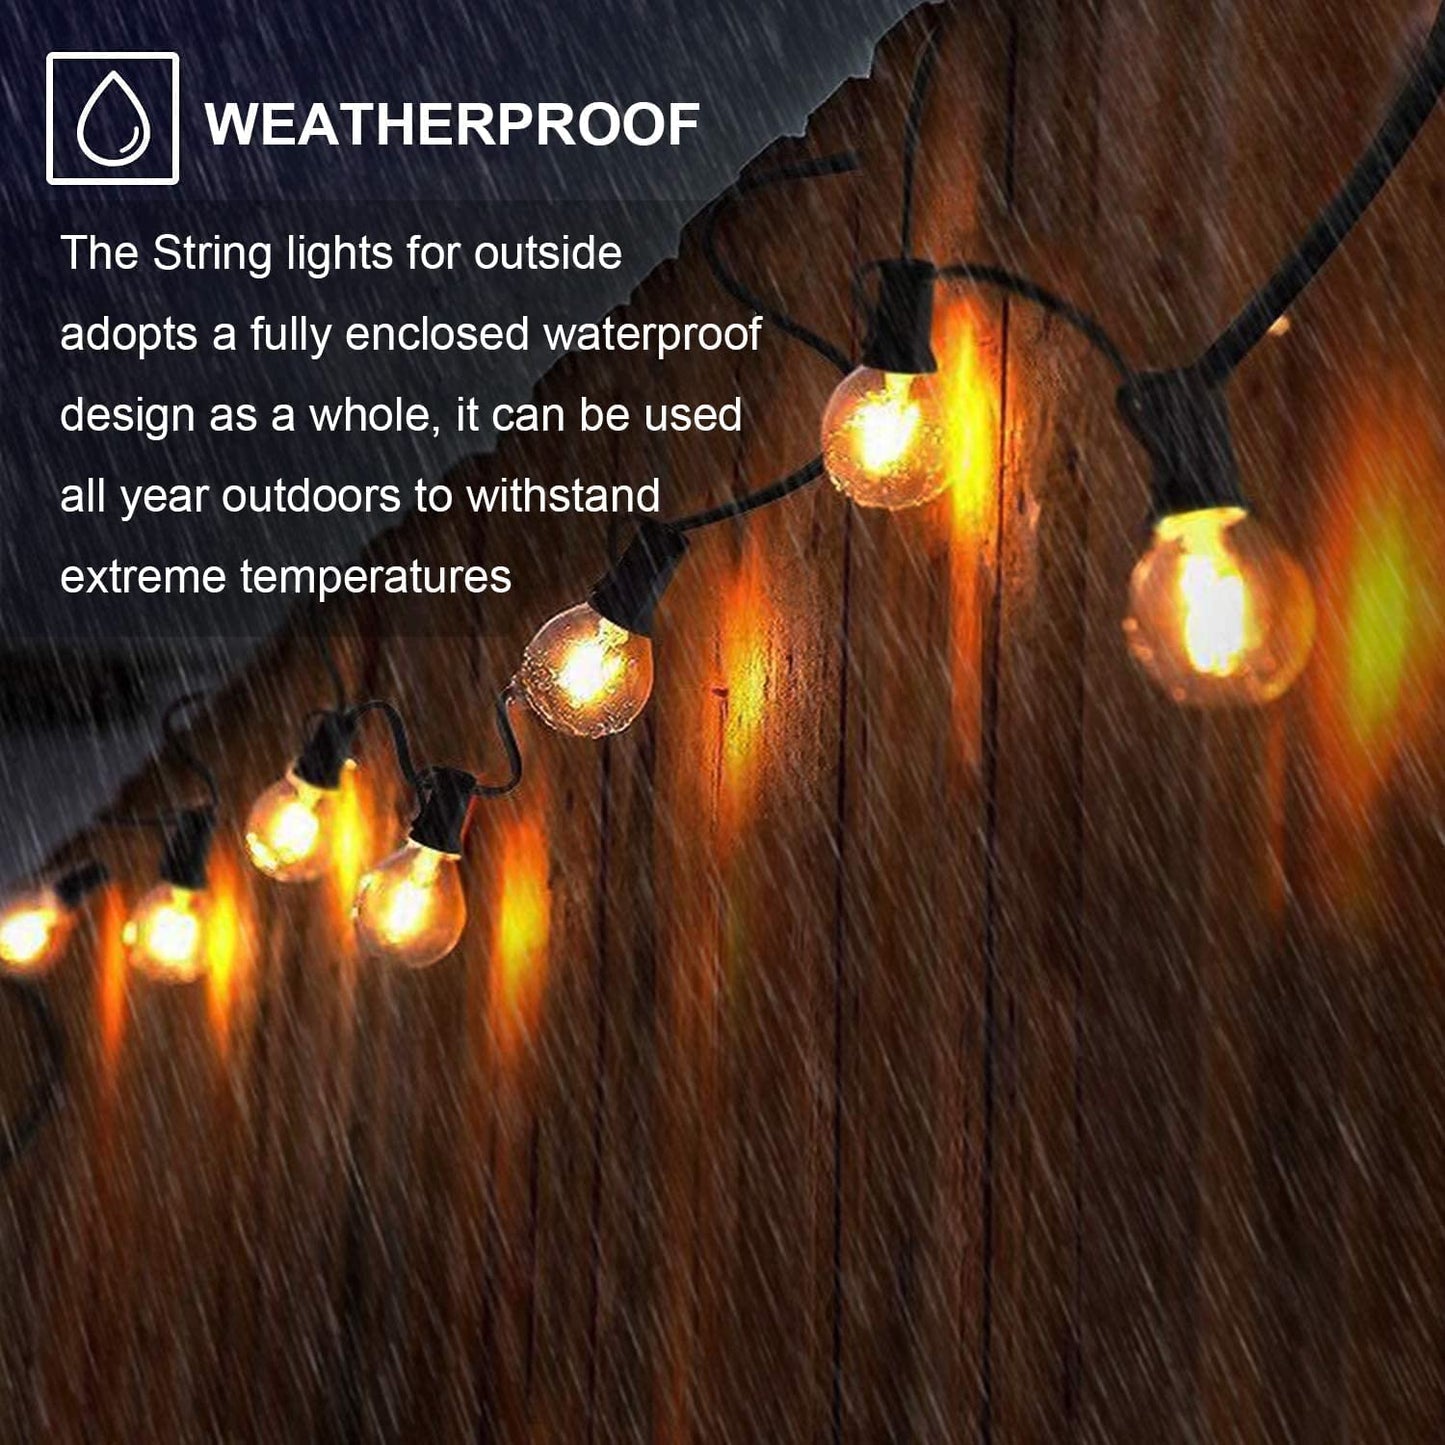 LED Outdoor String Lights Waterproof - 100FT 2 Pack Patio Lights with 52 Globe Bulbs, Connectable Commercial Hanging Lights for Outside Backyard Balcony Party